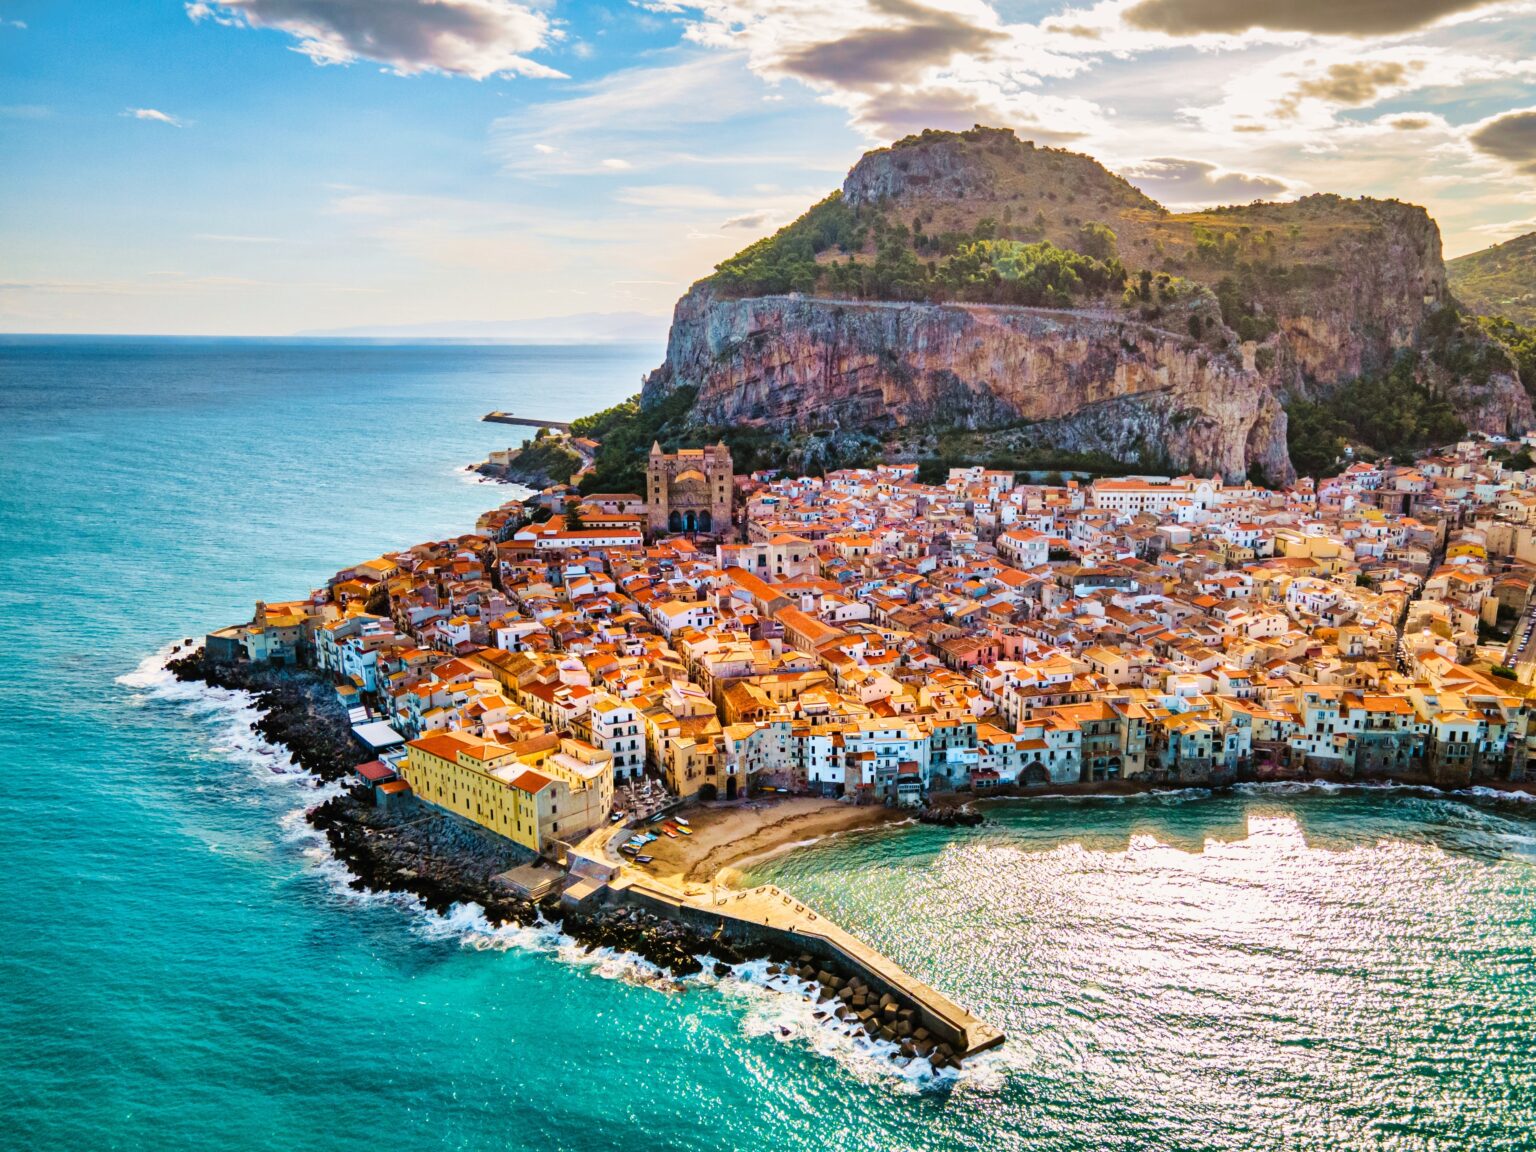 Sicily, the largest island in the Mediterranean - why visit?